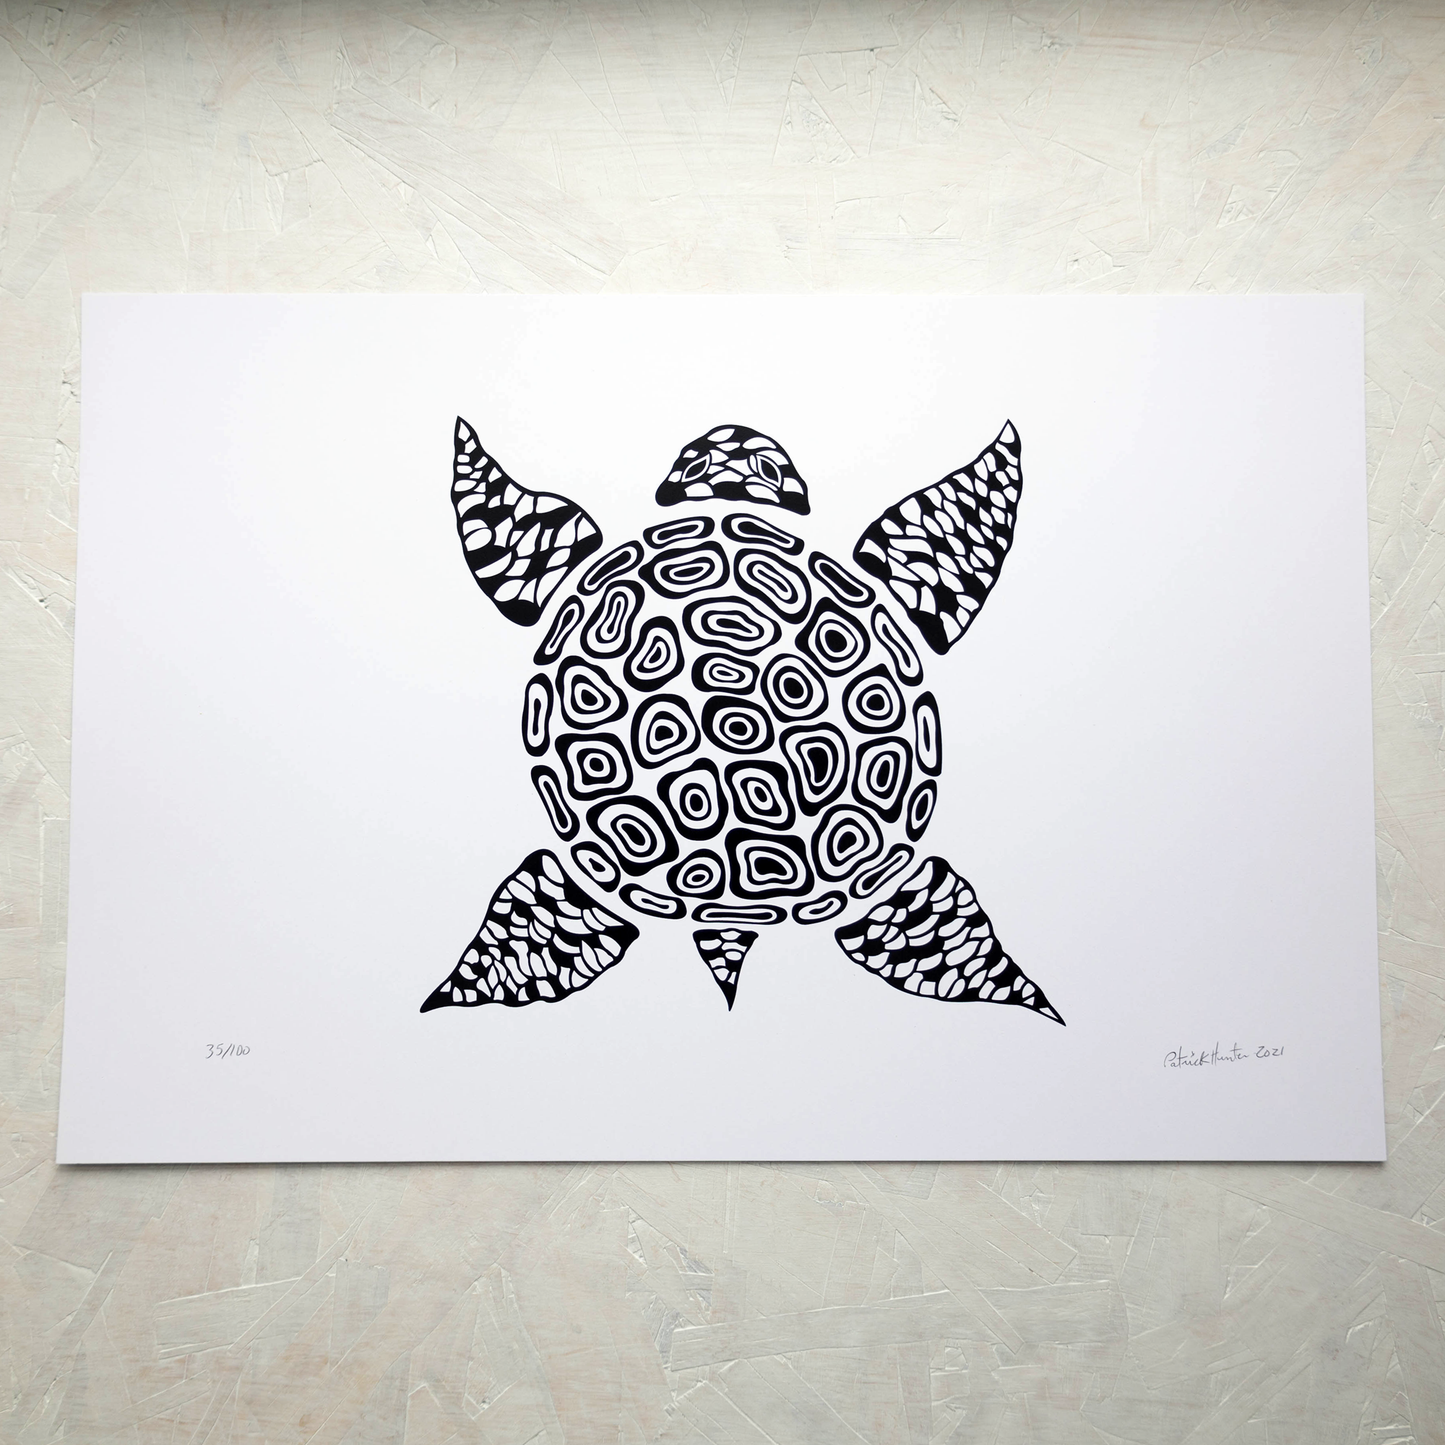 Print of Patrick Hunter's painting of a bird's eye view of a turtle, black on white, woodland art style.